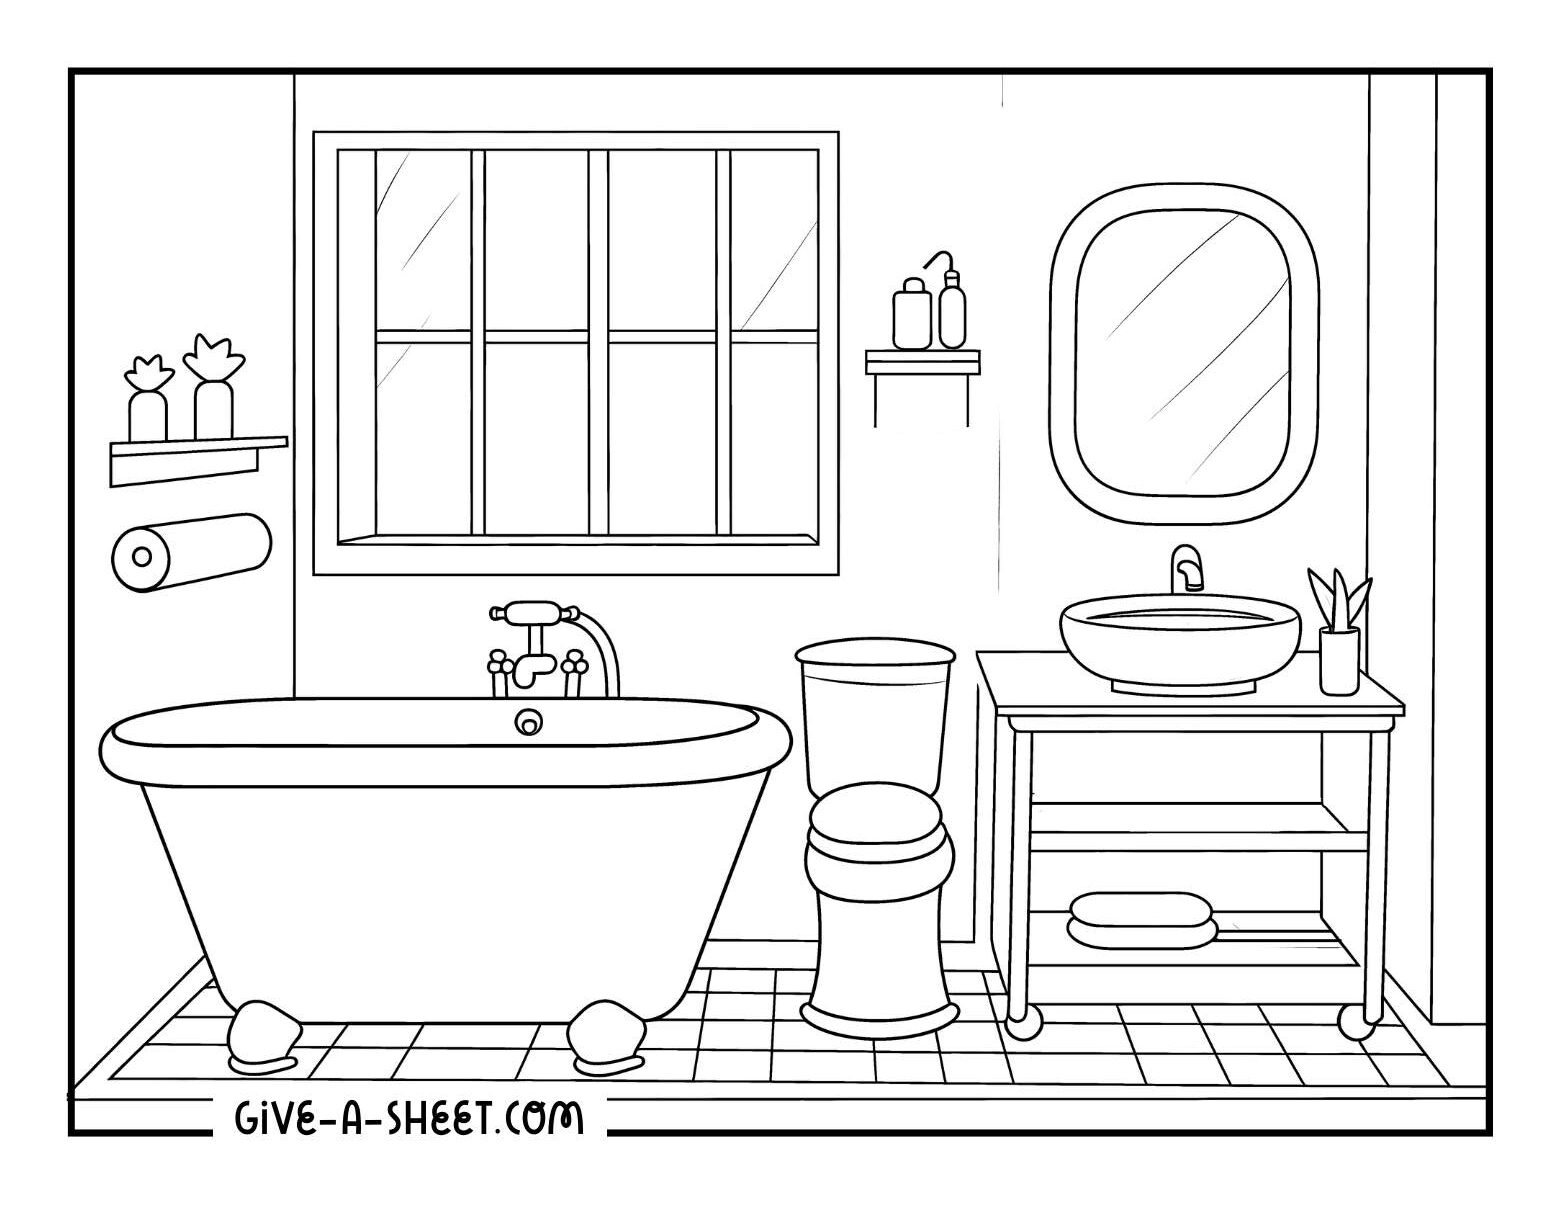 Creative way to color toilet and bathroom coloring sheet for kids.